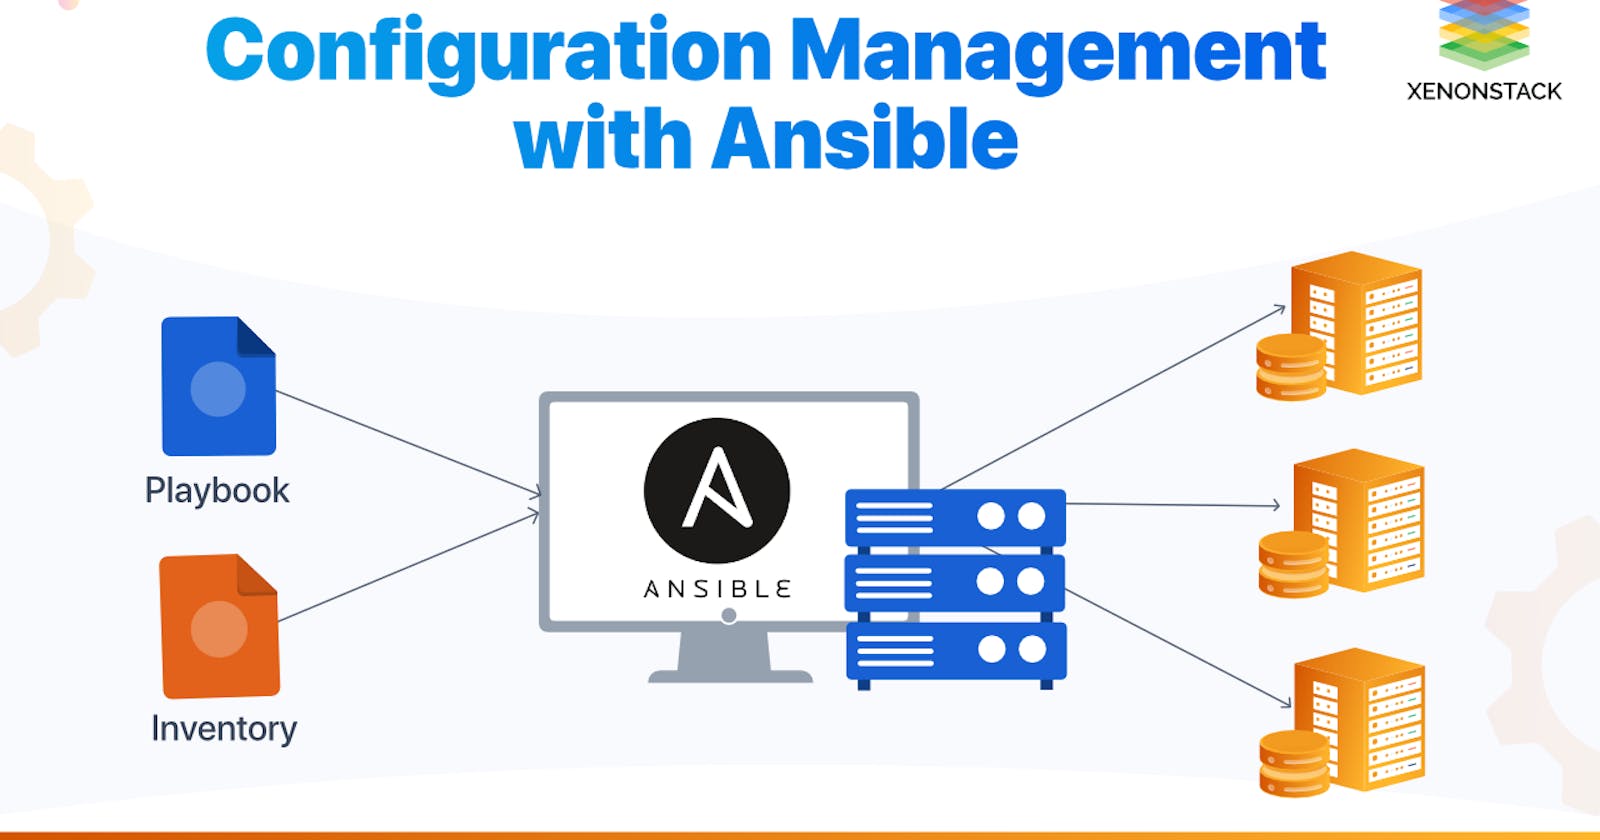 Automating AWS EC2 Instance Creation: Unleashing the Power of Ansible